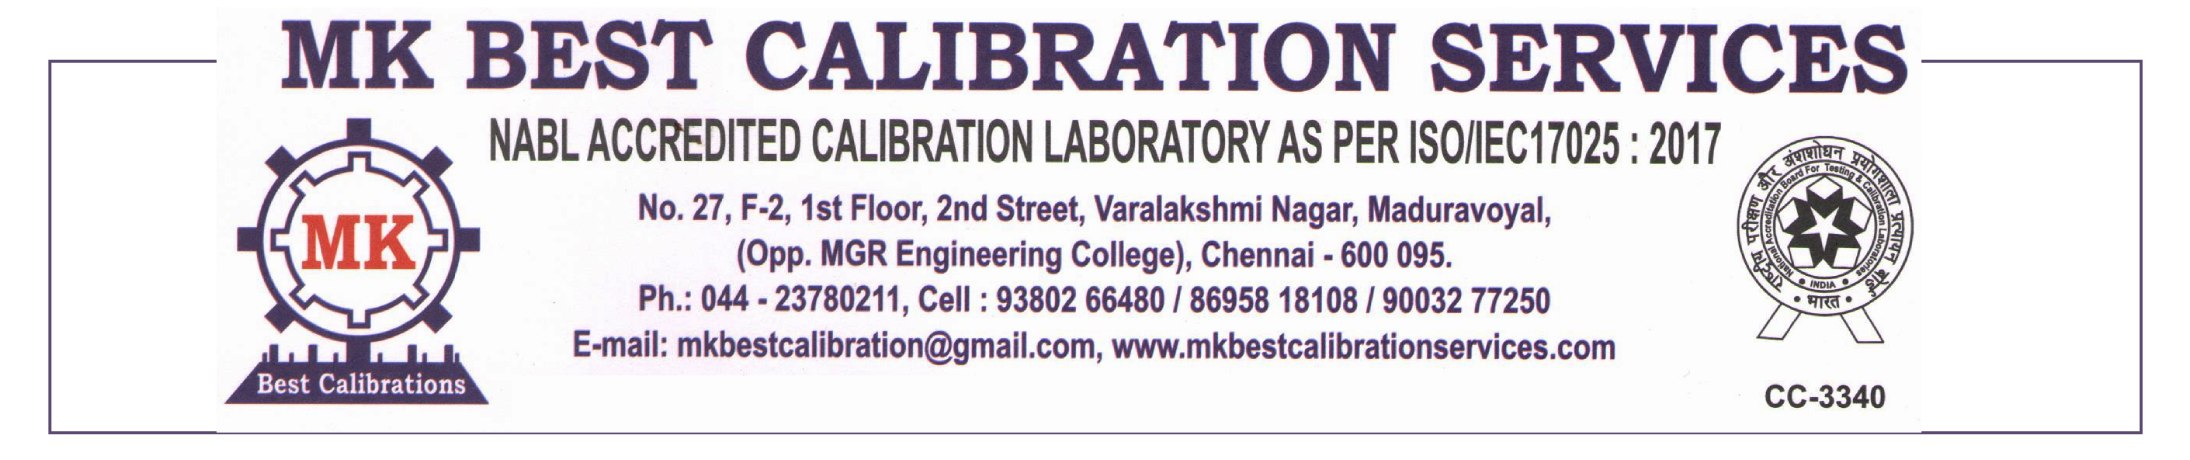 Calibration Services in Chennai, Measuring Instruments Dealers in Chennai